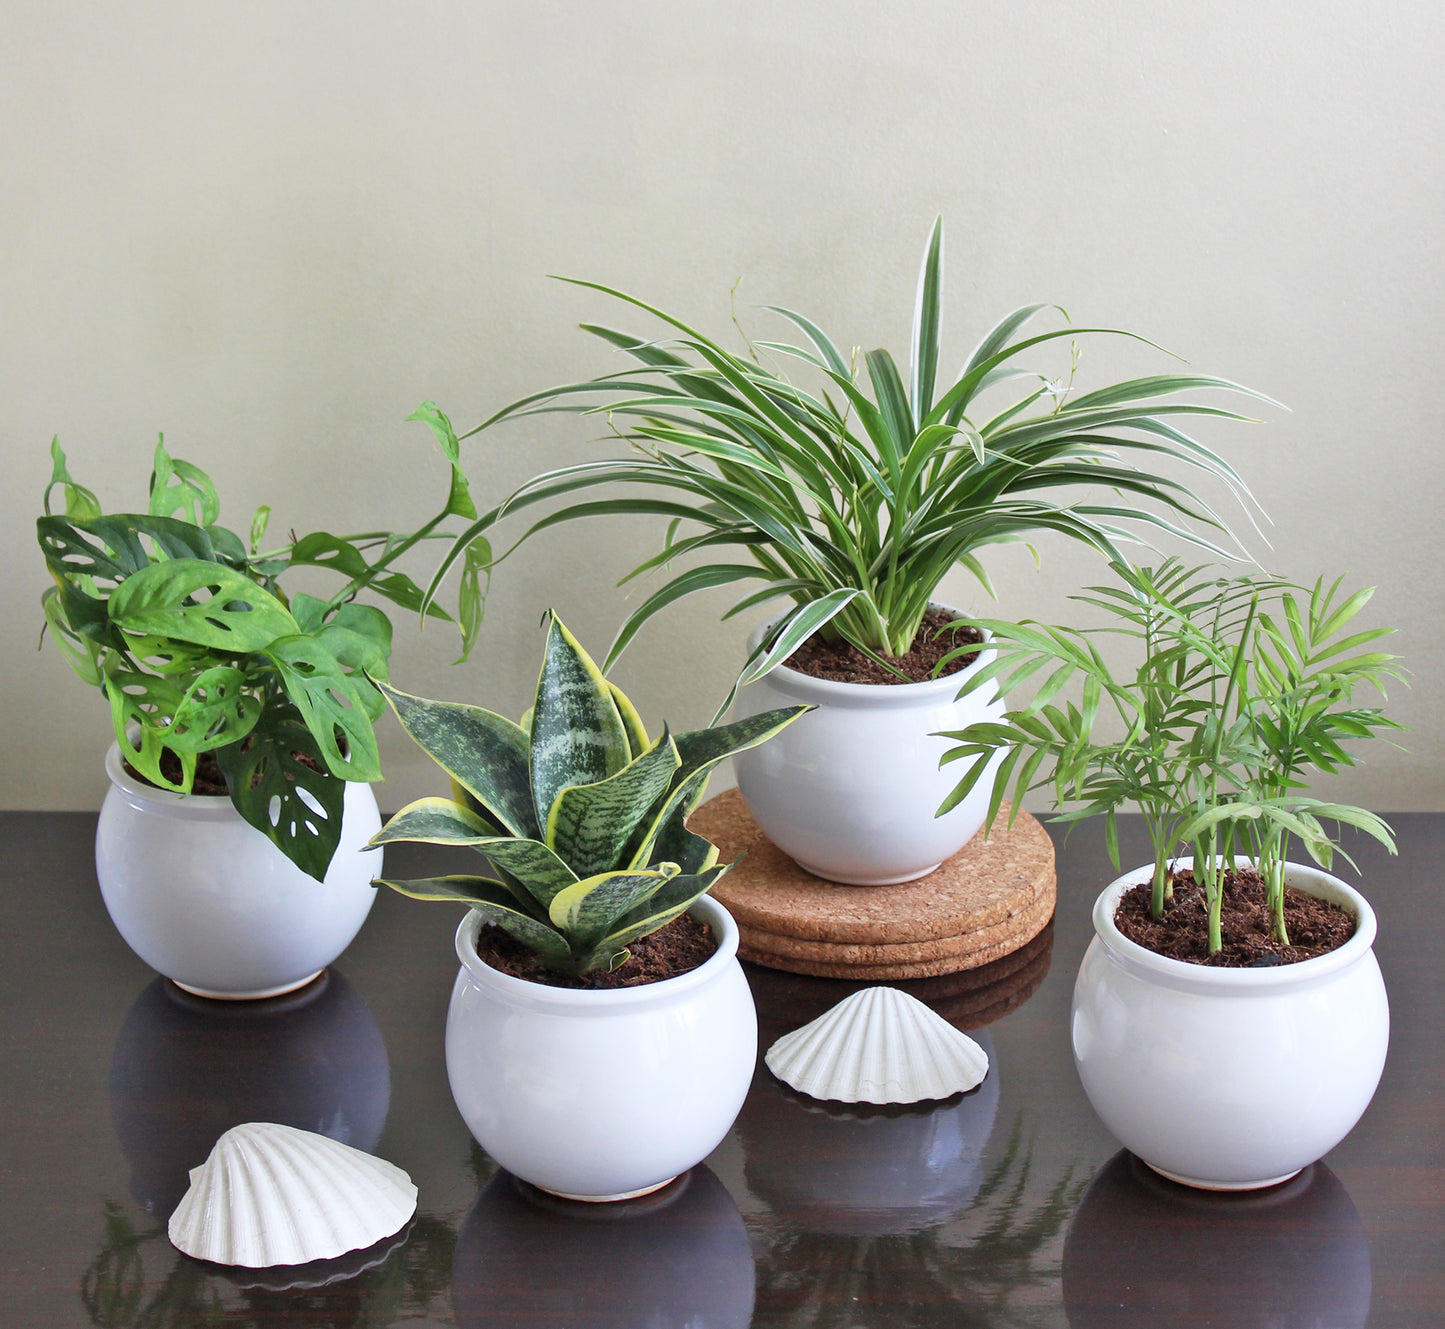 Rolling Nature Combo of 4 Indoor Plants for Home in Vase Glacier Ceramic Pots (Broken Heart Monstera, Snake Plant Sansevieria Hahnii Yellow Milt, Spider Plant and Parlour Palm Chamaedorea Elegans)